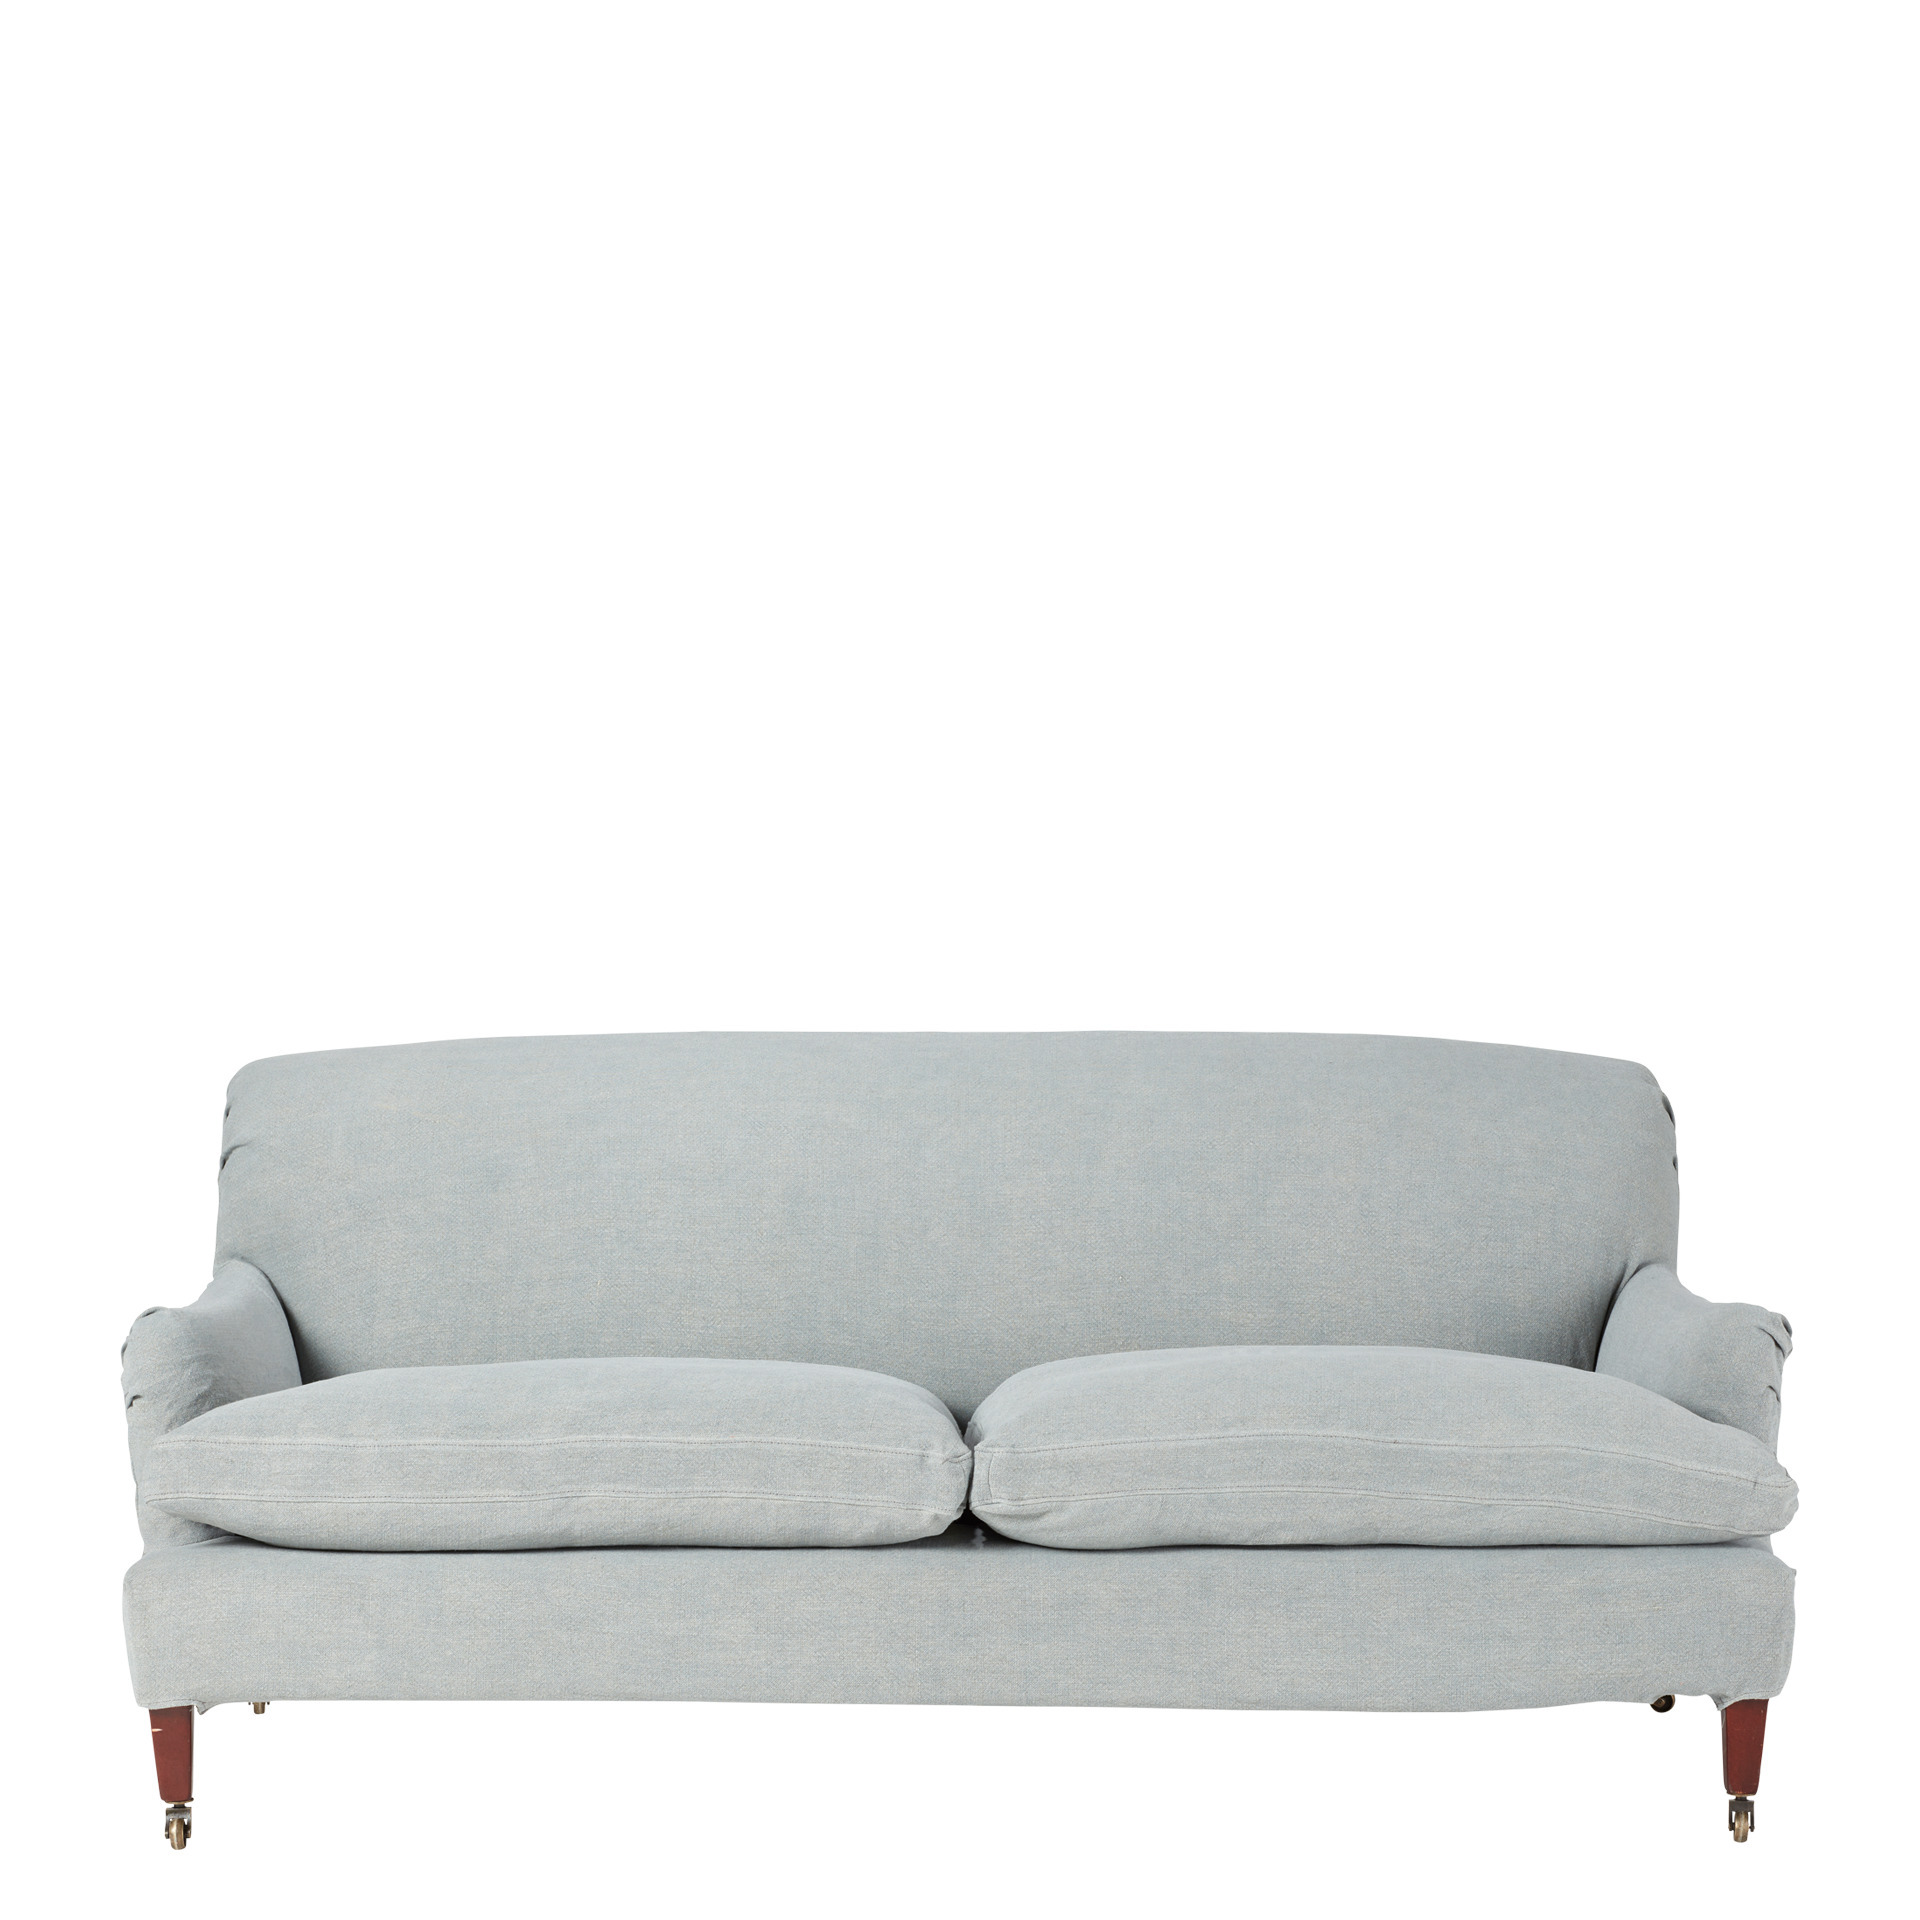 Linen Loose Cover for Coleridge 3-Seater Sofa - Ice Blue